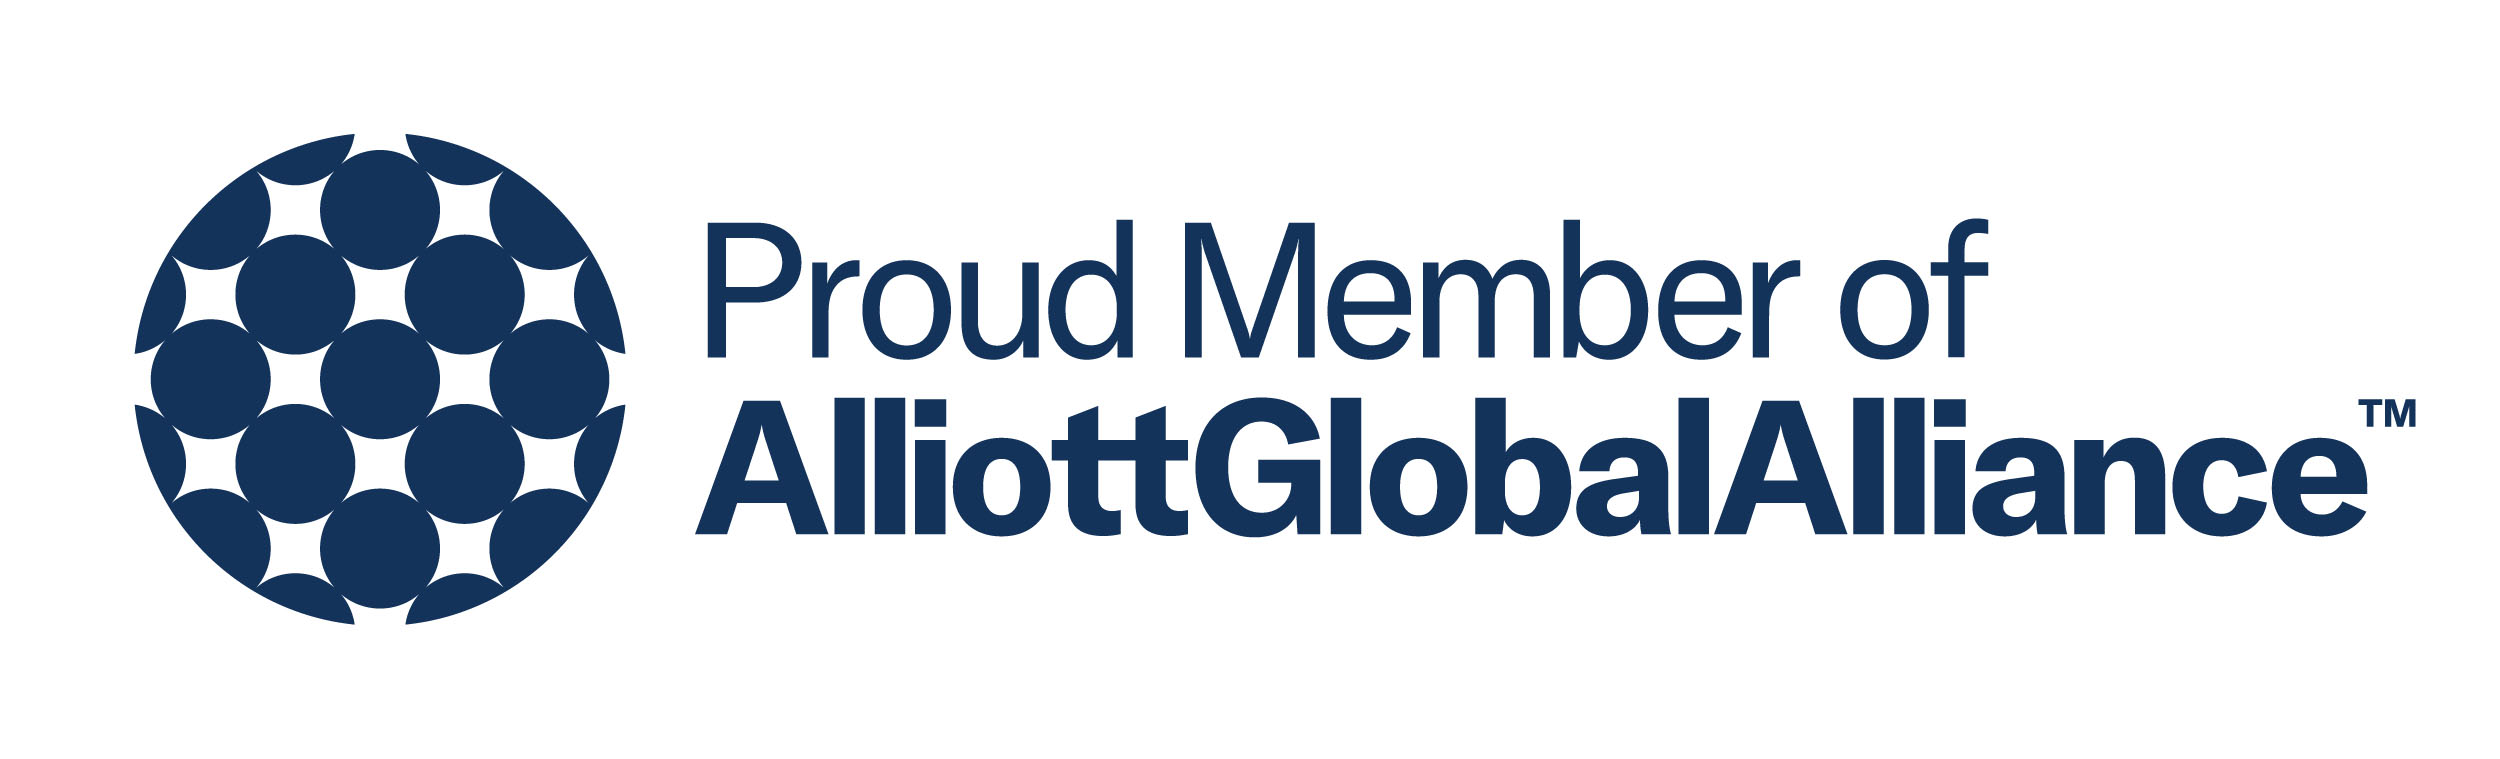 Member of the Alliott Group, a worldwide alliance of independent accounting, law and consulting firms